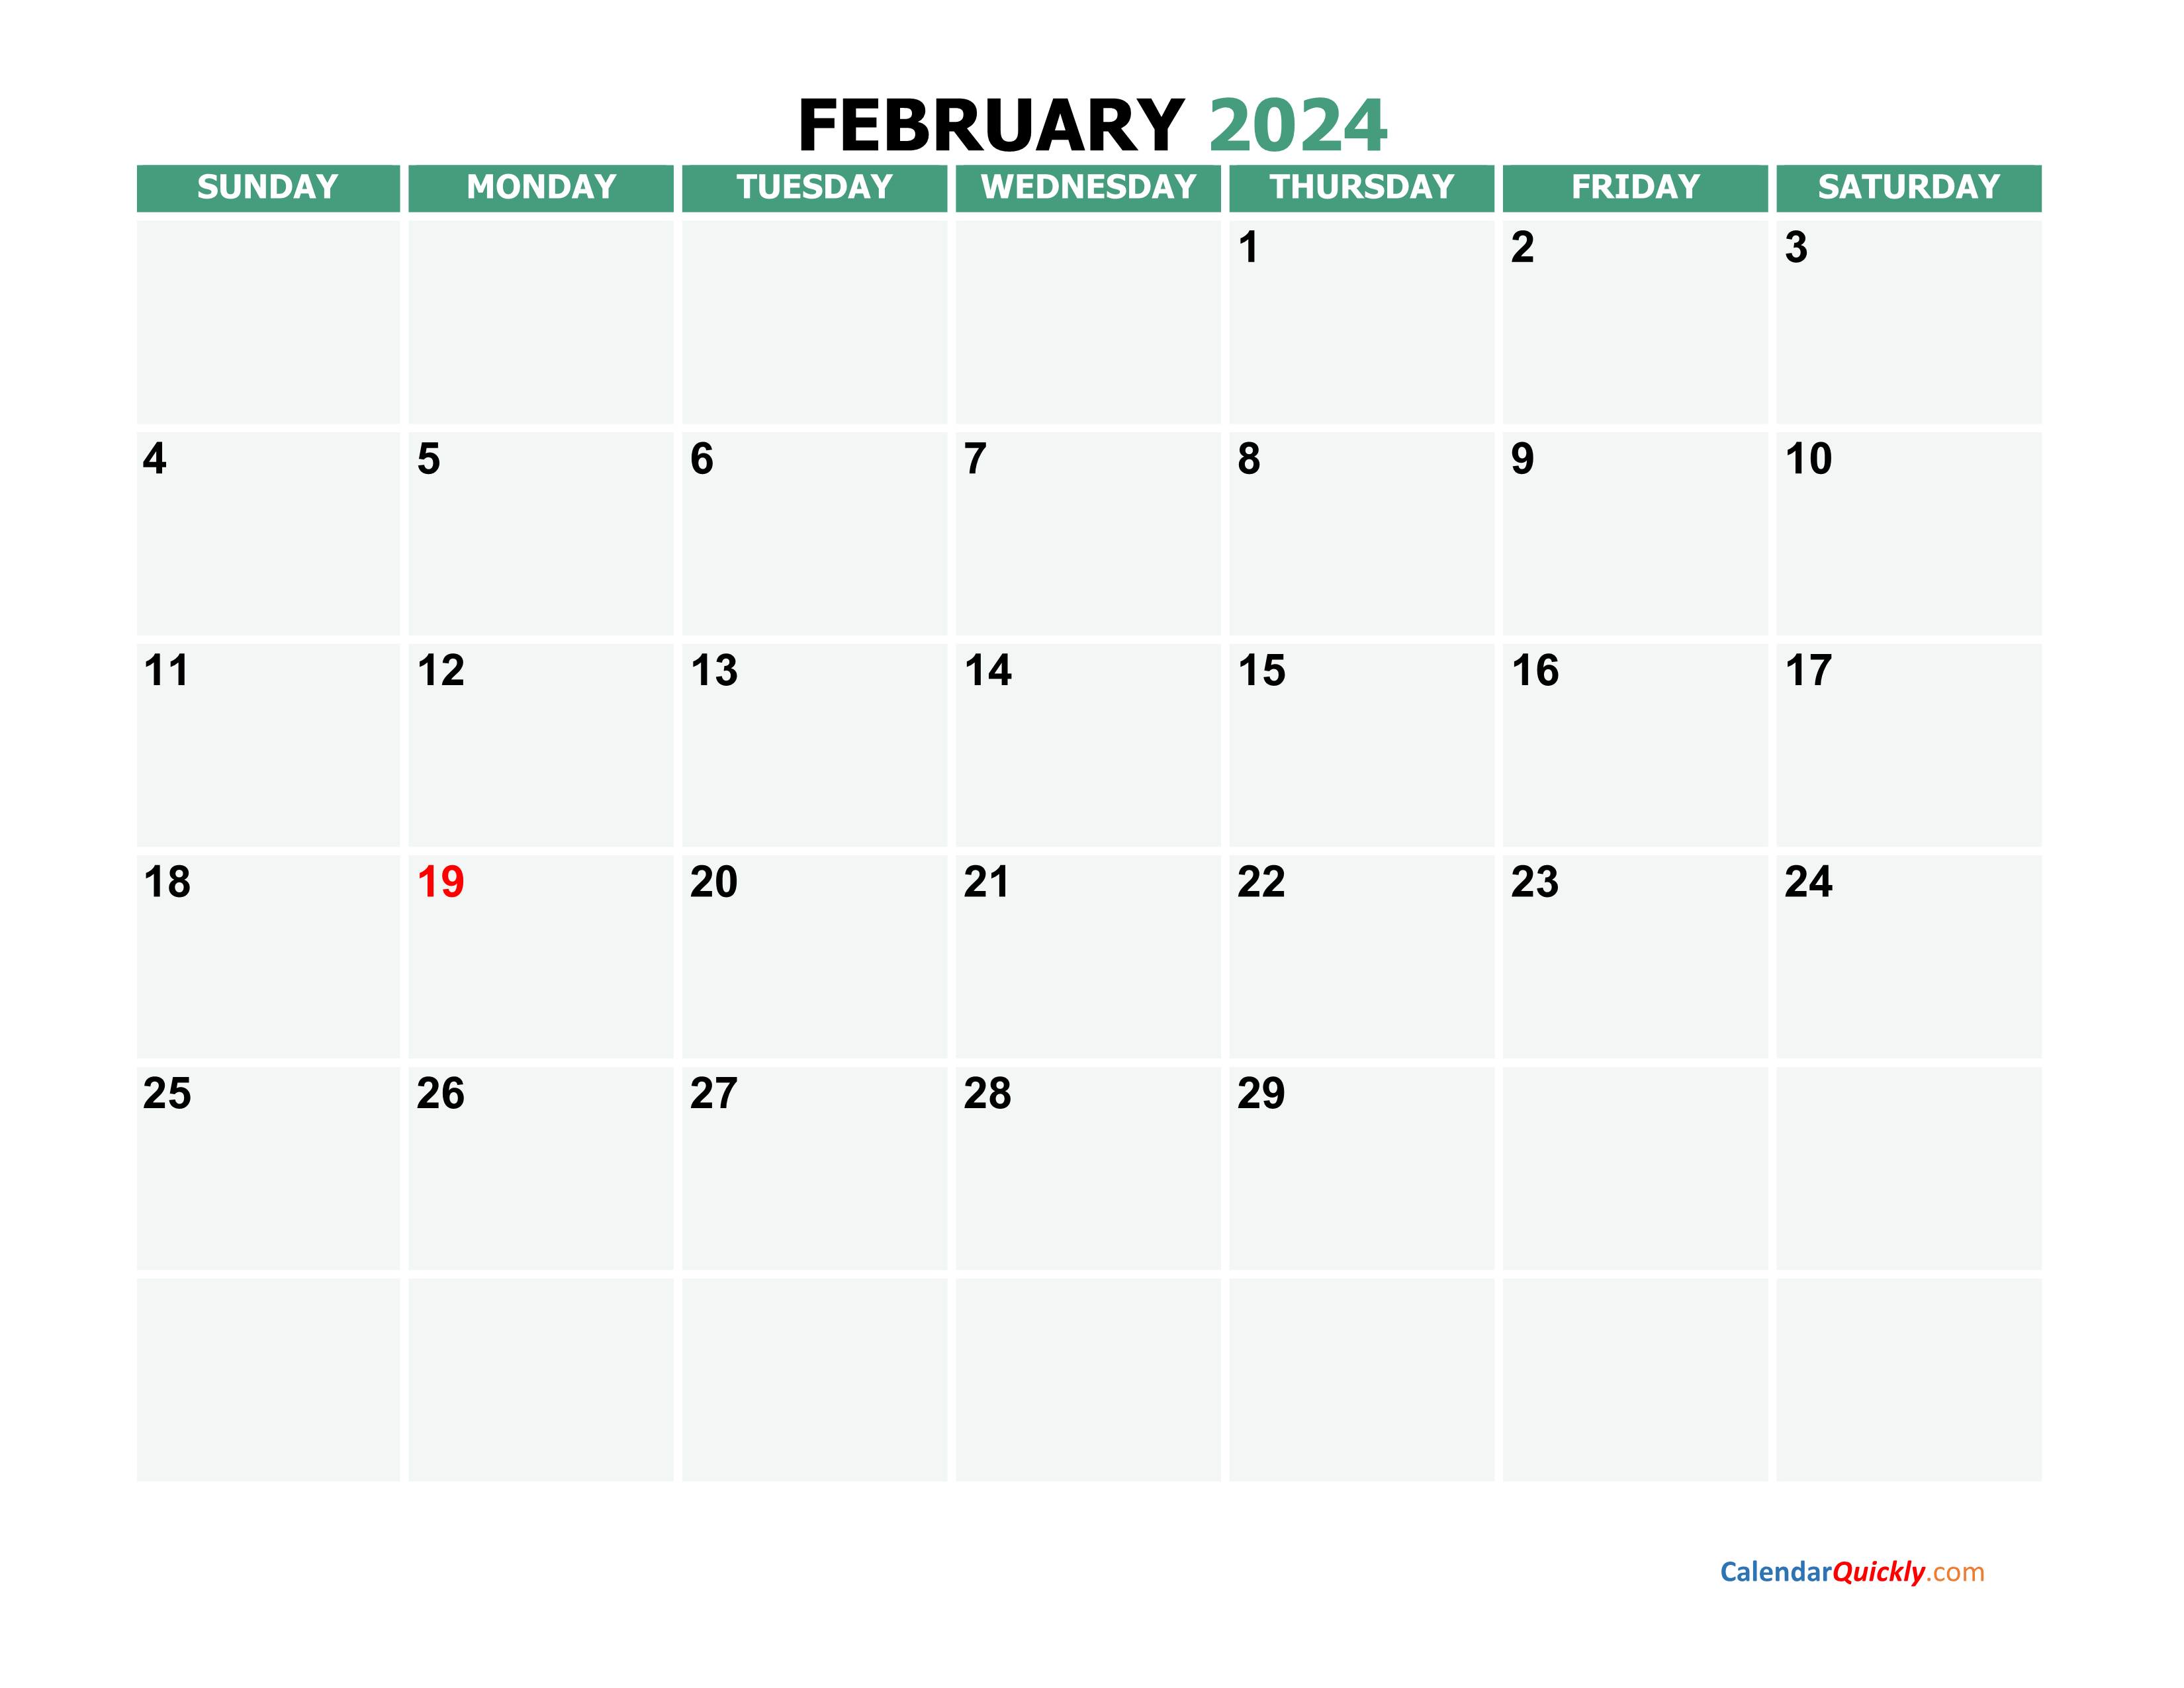 February Days Chart 2024 Best Top Awesome Incredible Lunar Events Calendar 2024